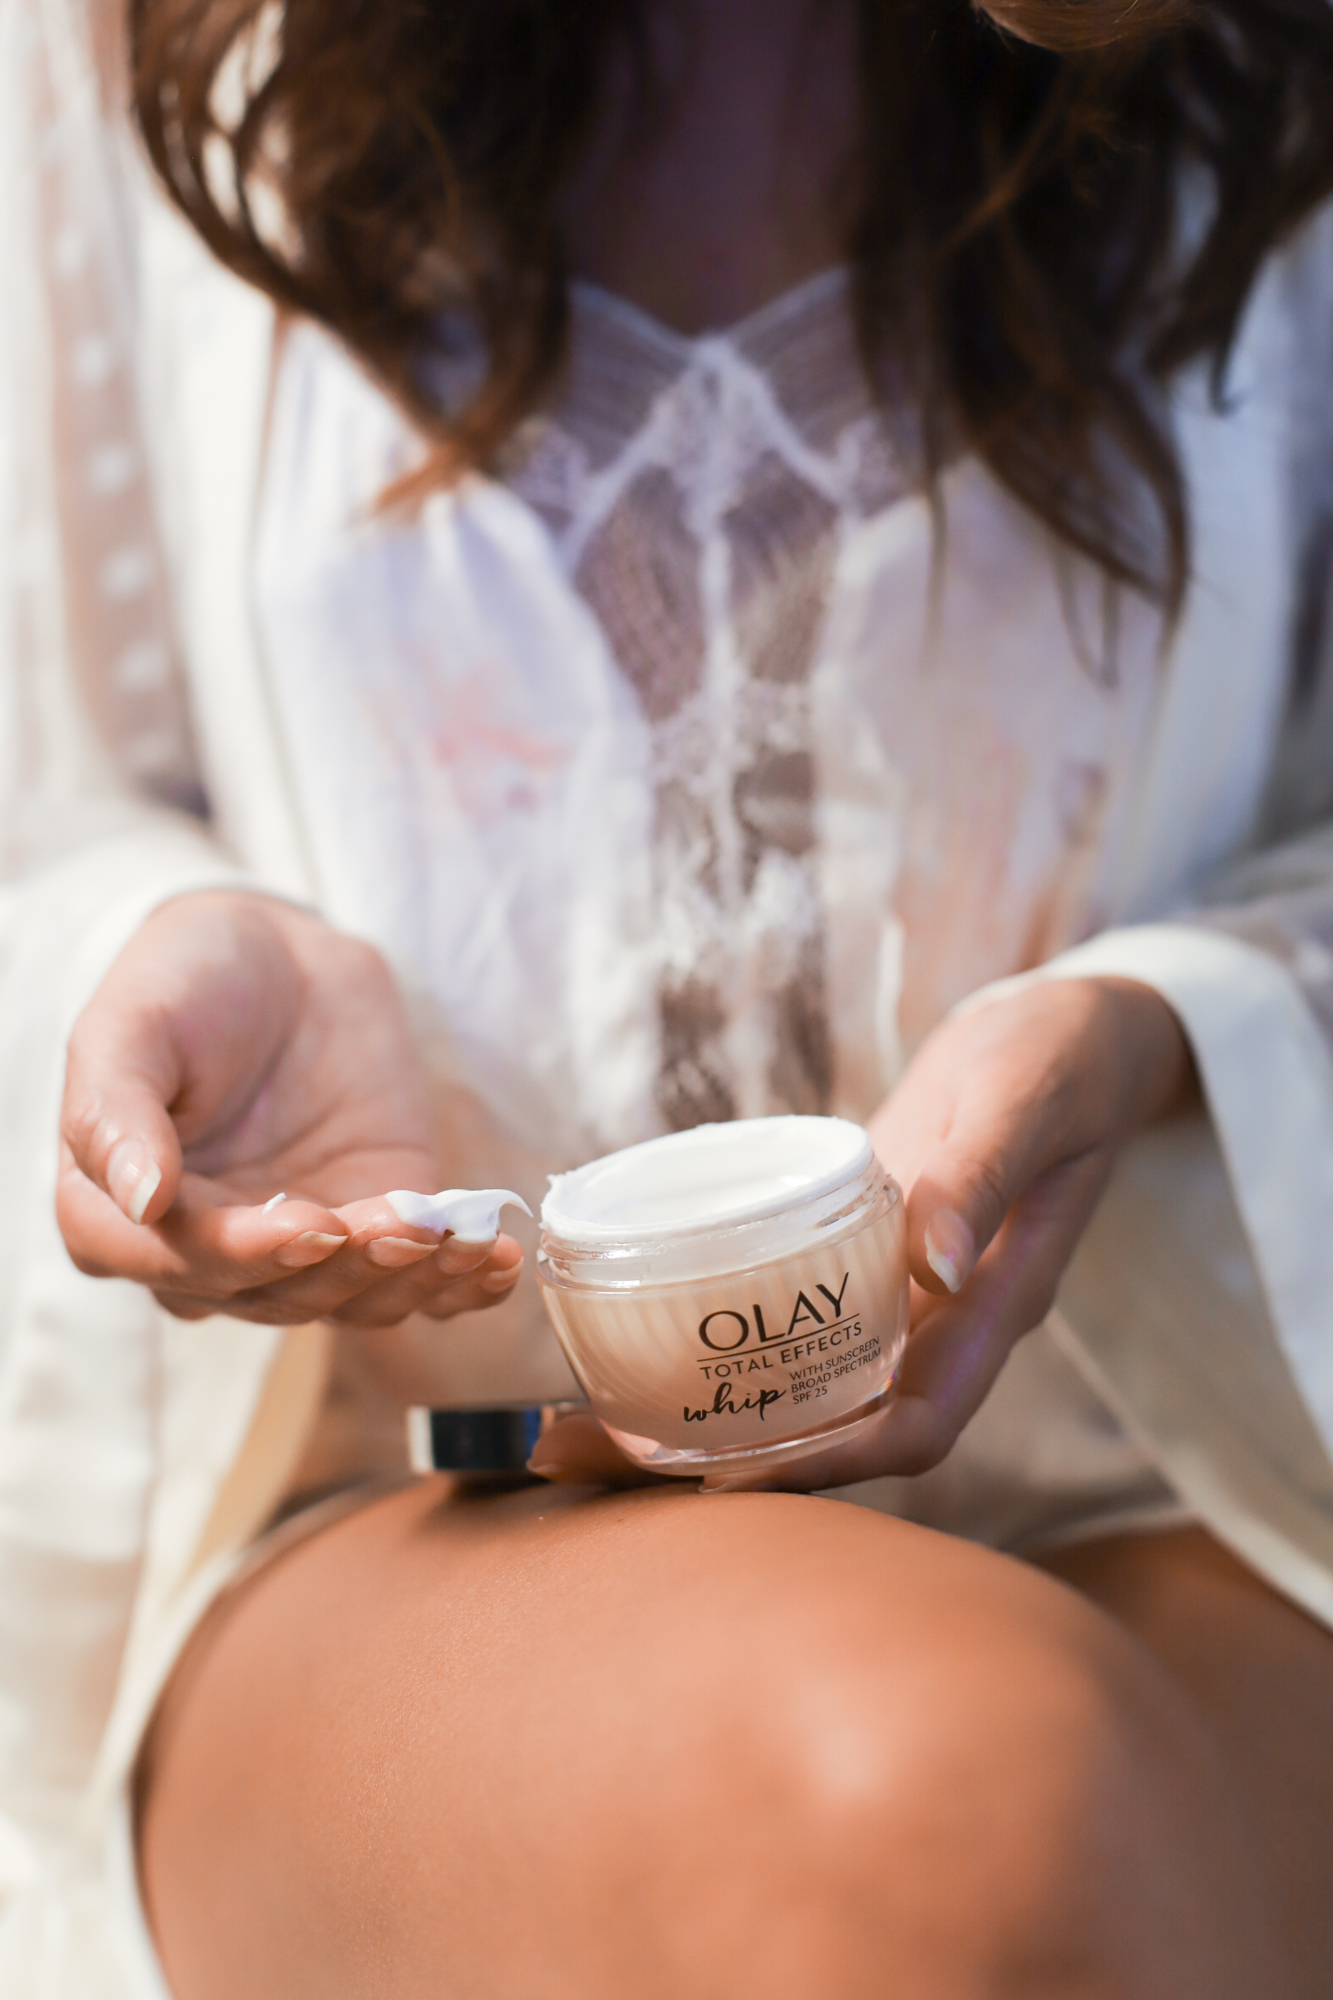 Olay Whips Luminous with SPF 25, summer beauty, moisturizer, the importance of SPF